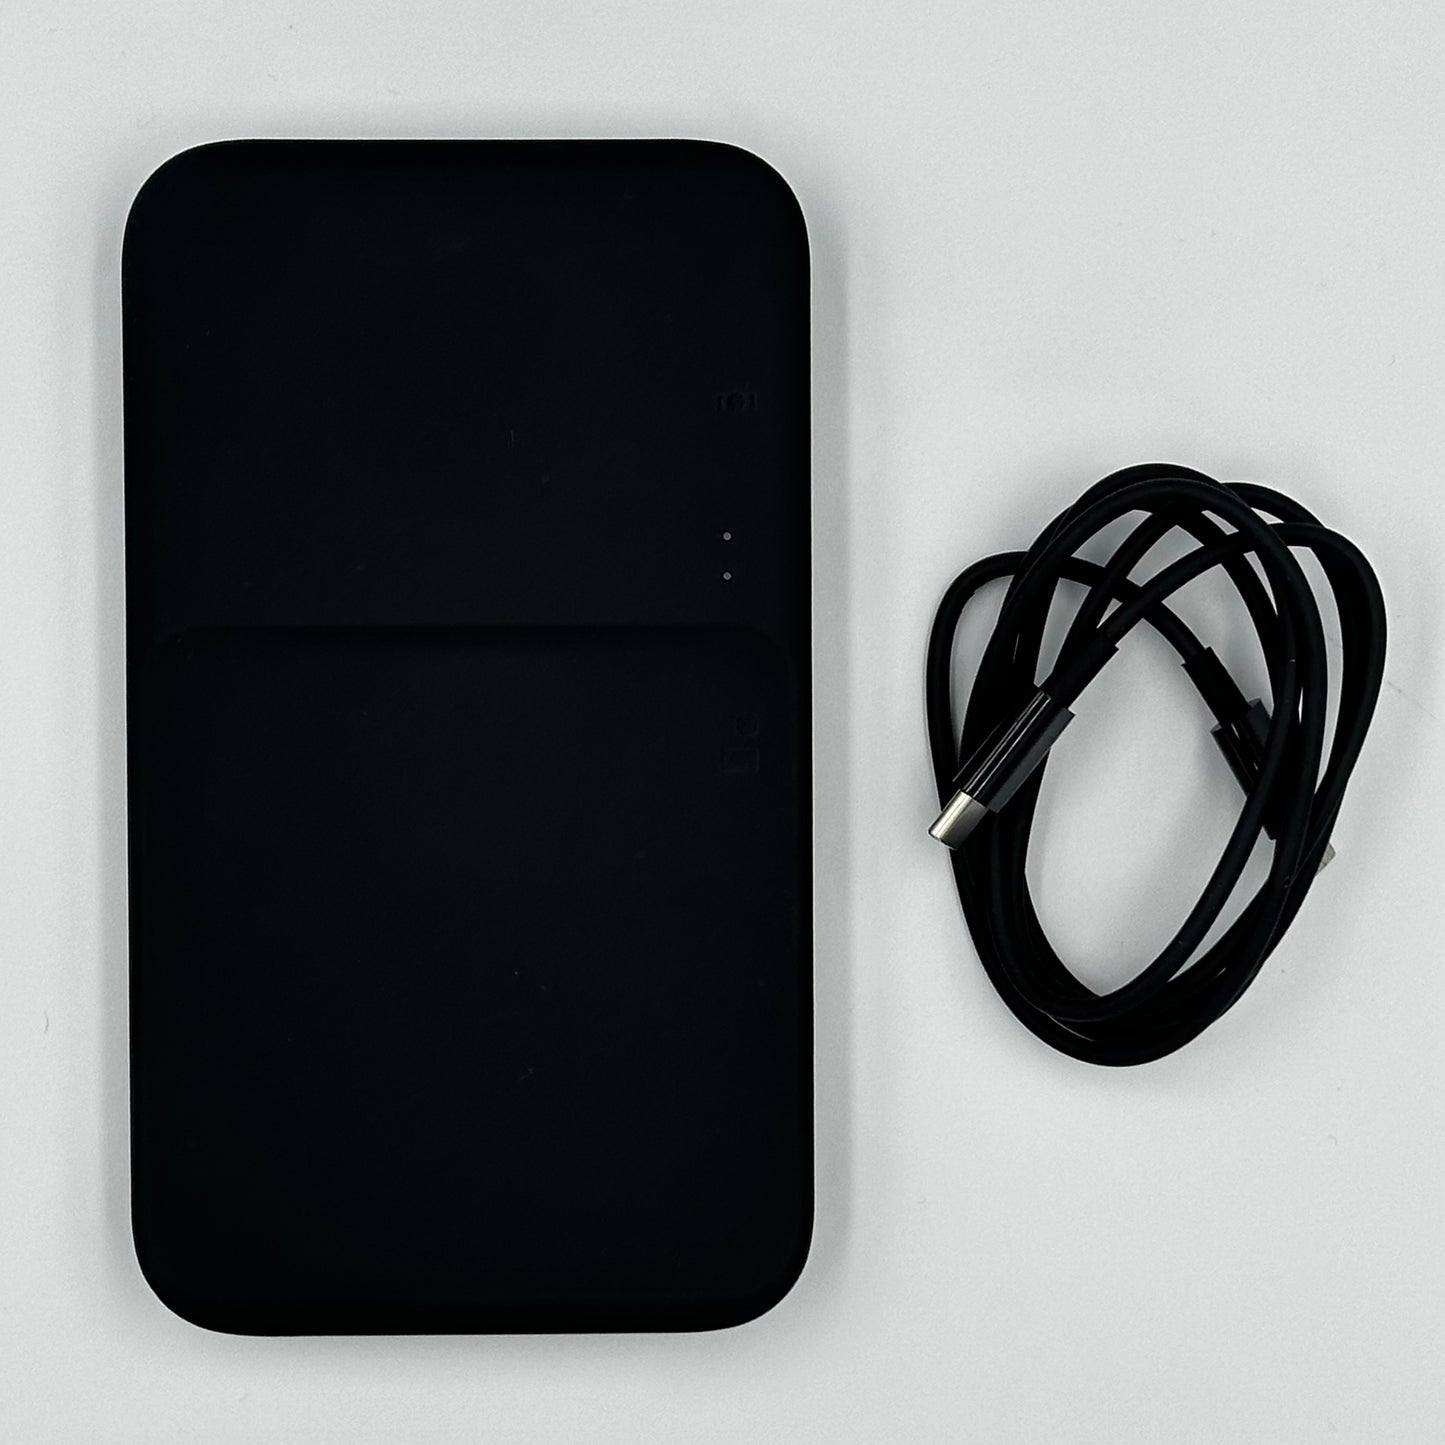 Samsung Wireless Charger (Aftermarket)